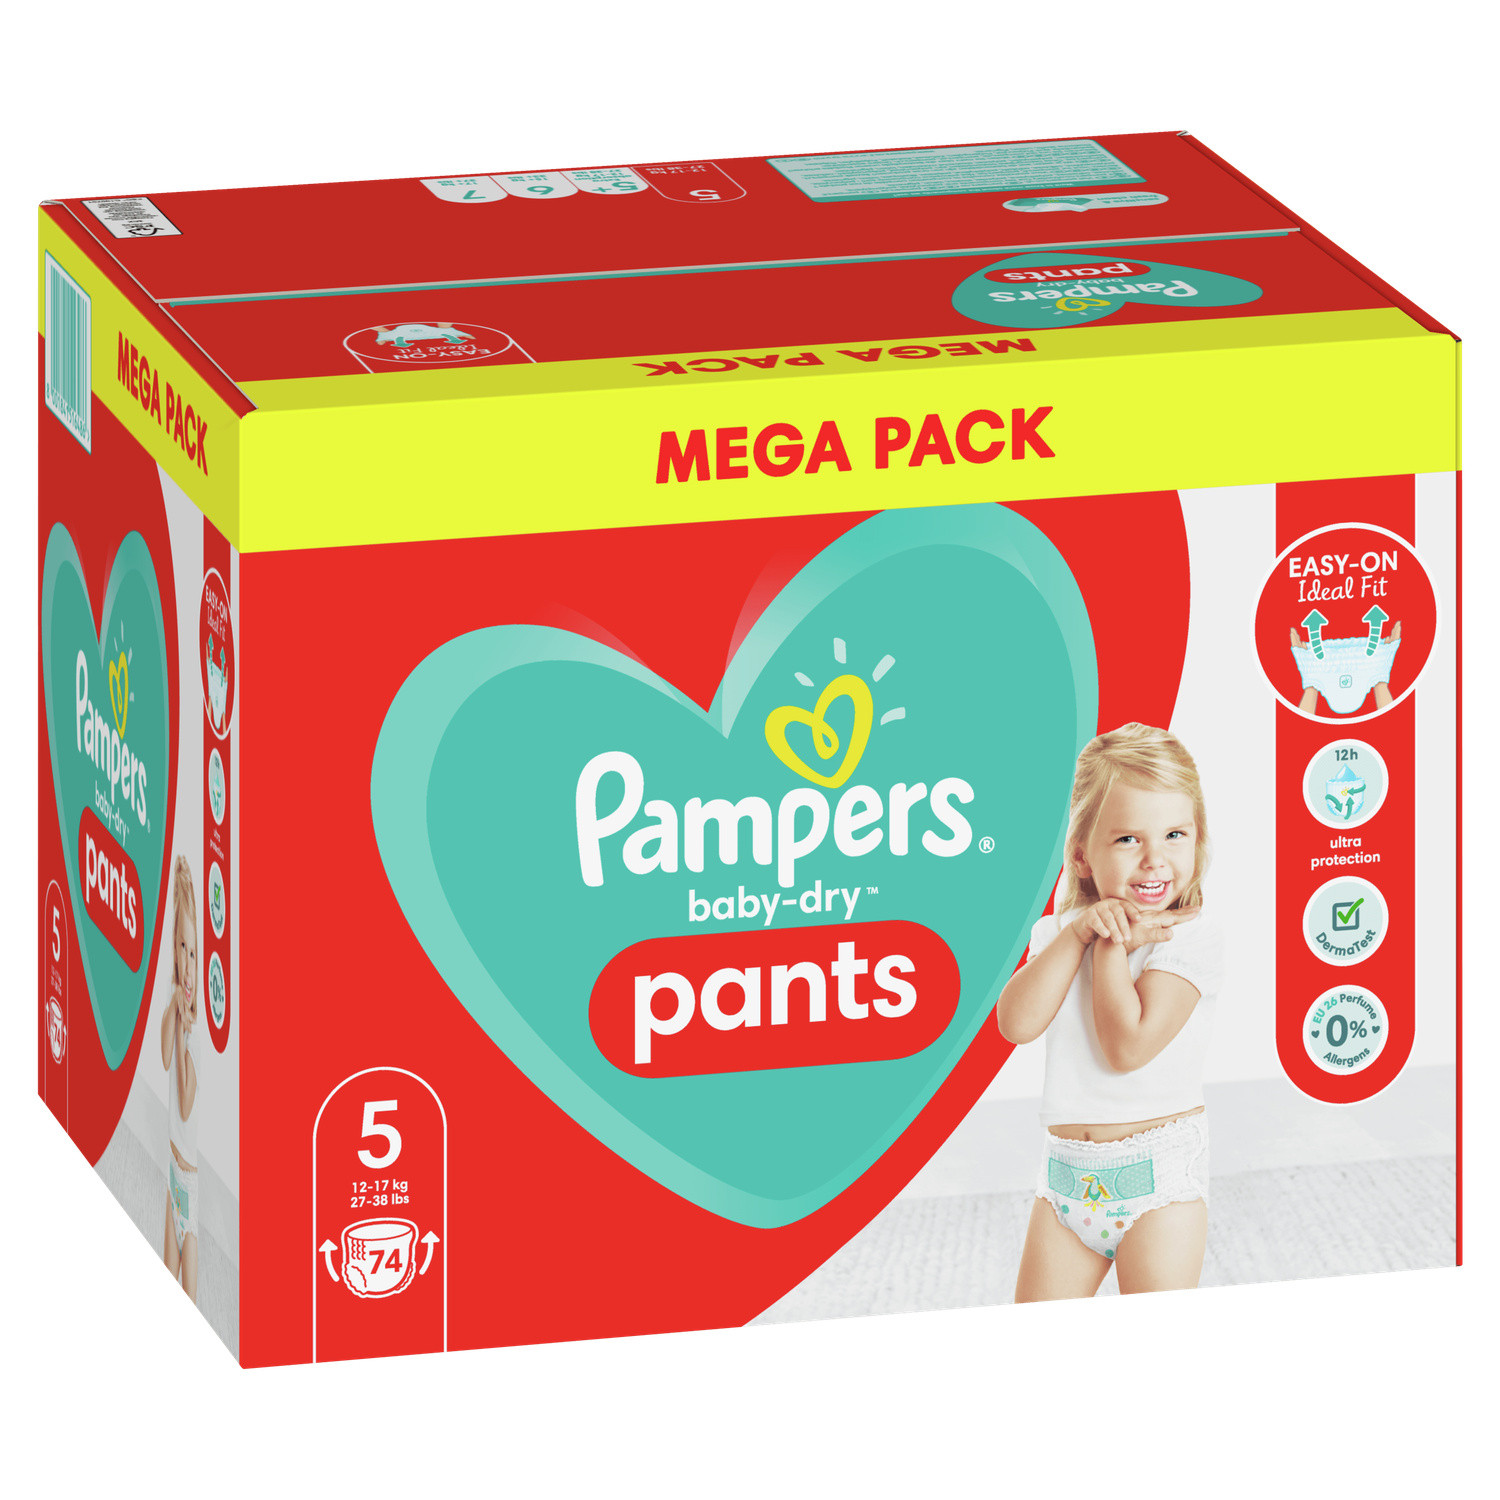 Pampers Couches culottes Baby-Dry Pants Night taille 5 12-17 kg